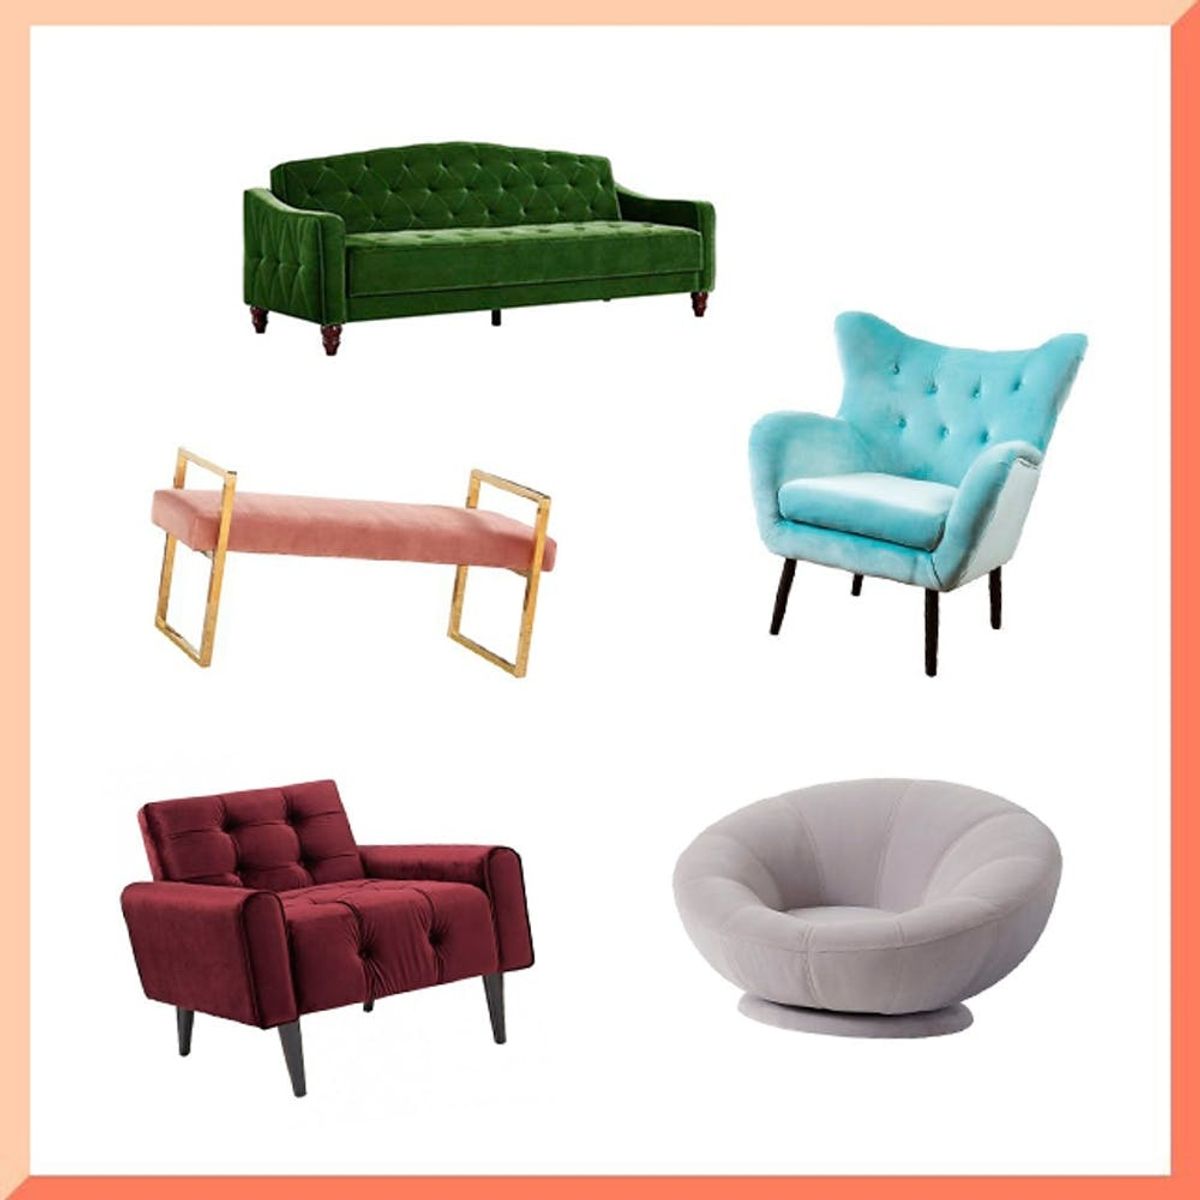 19 Velvet Furniture Buys for Every Budget